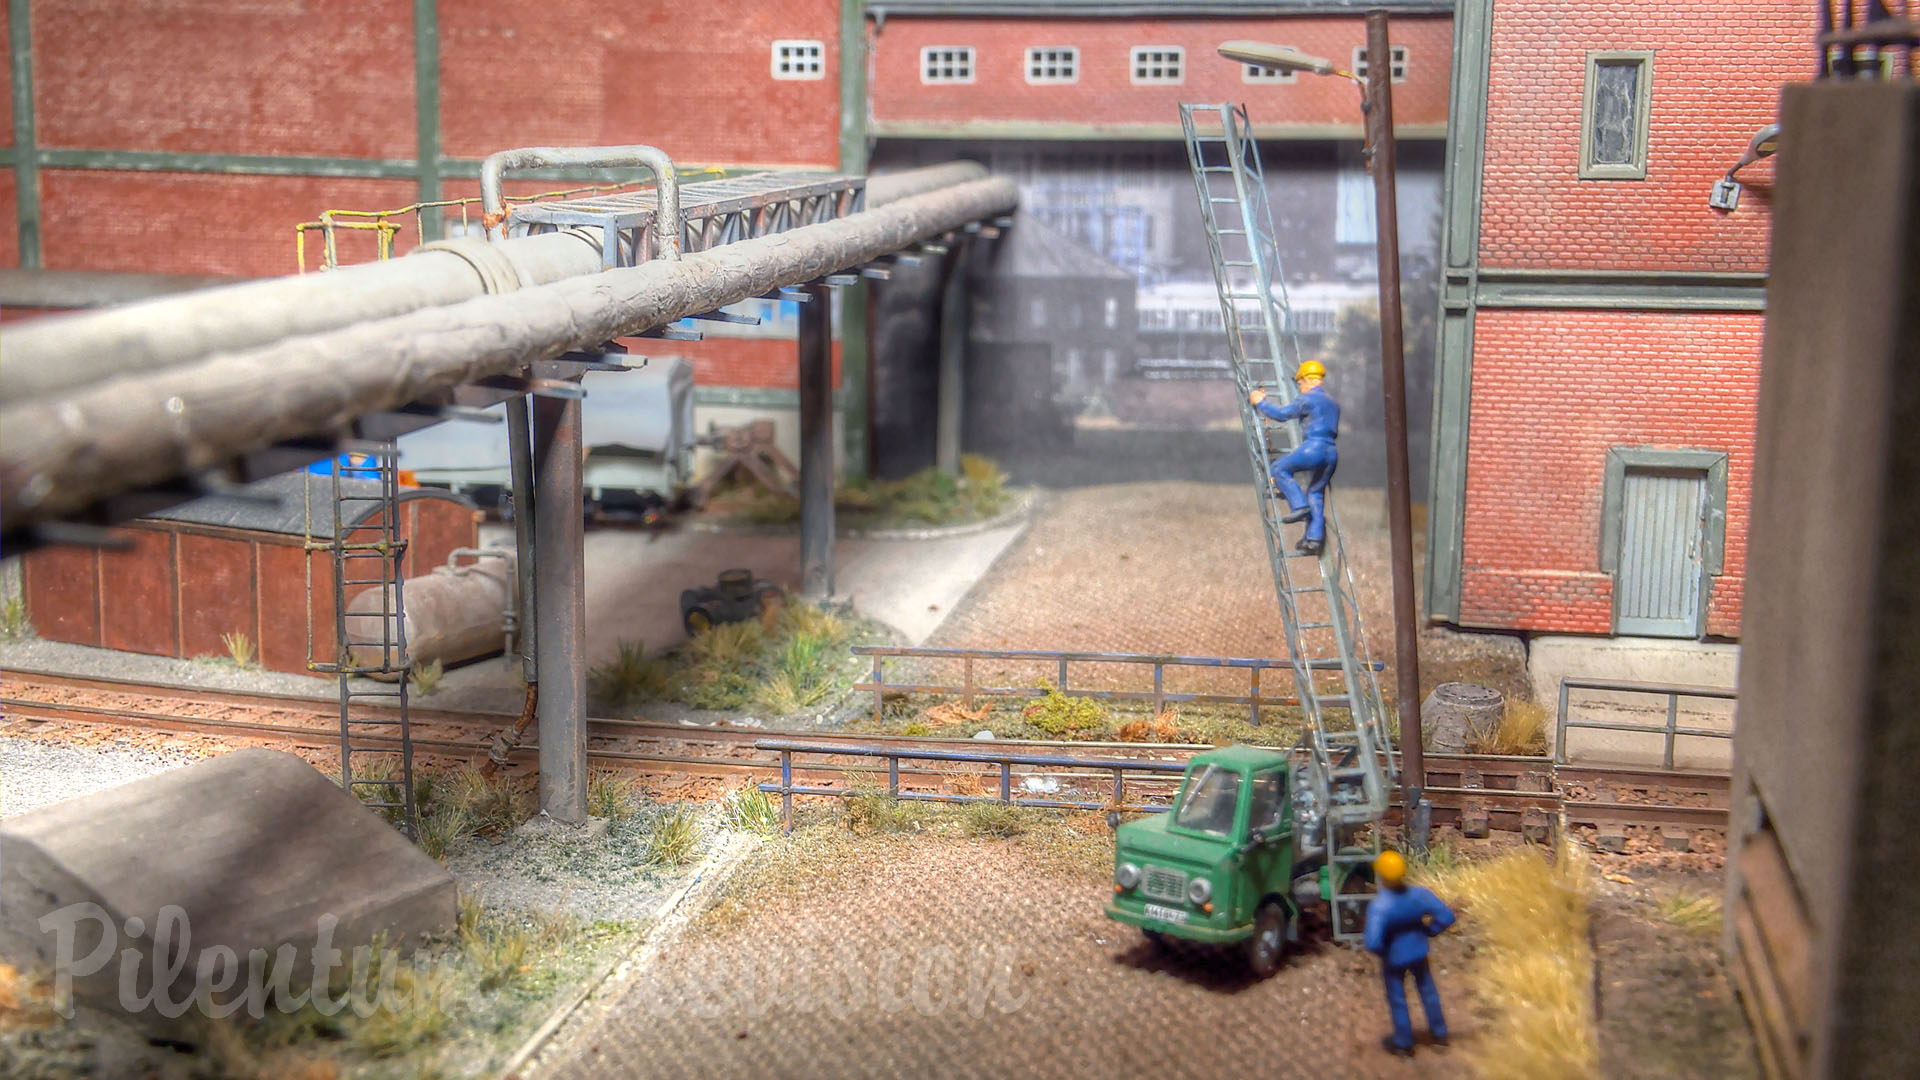 One of the most authentic model railroads of an East German chemical plant with industrial railways